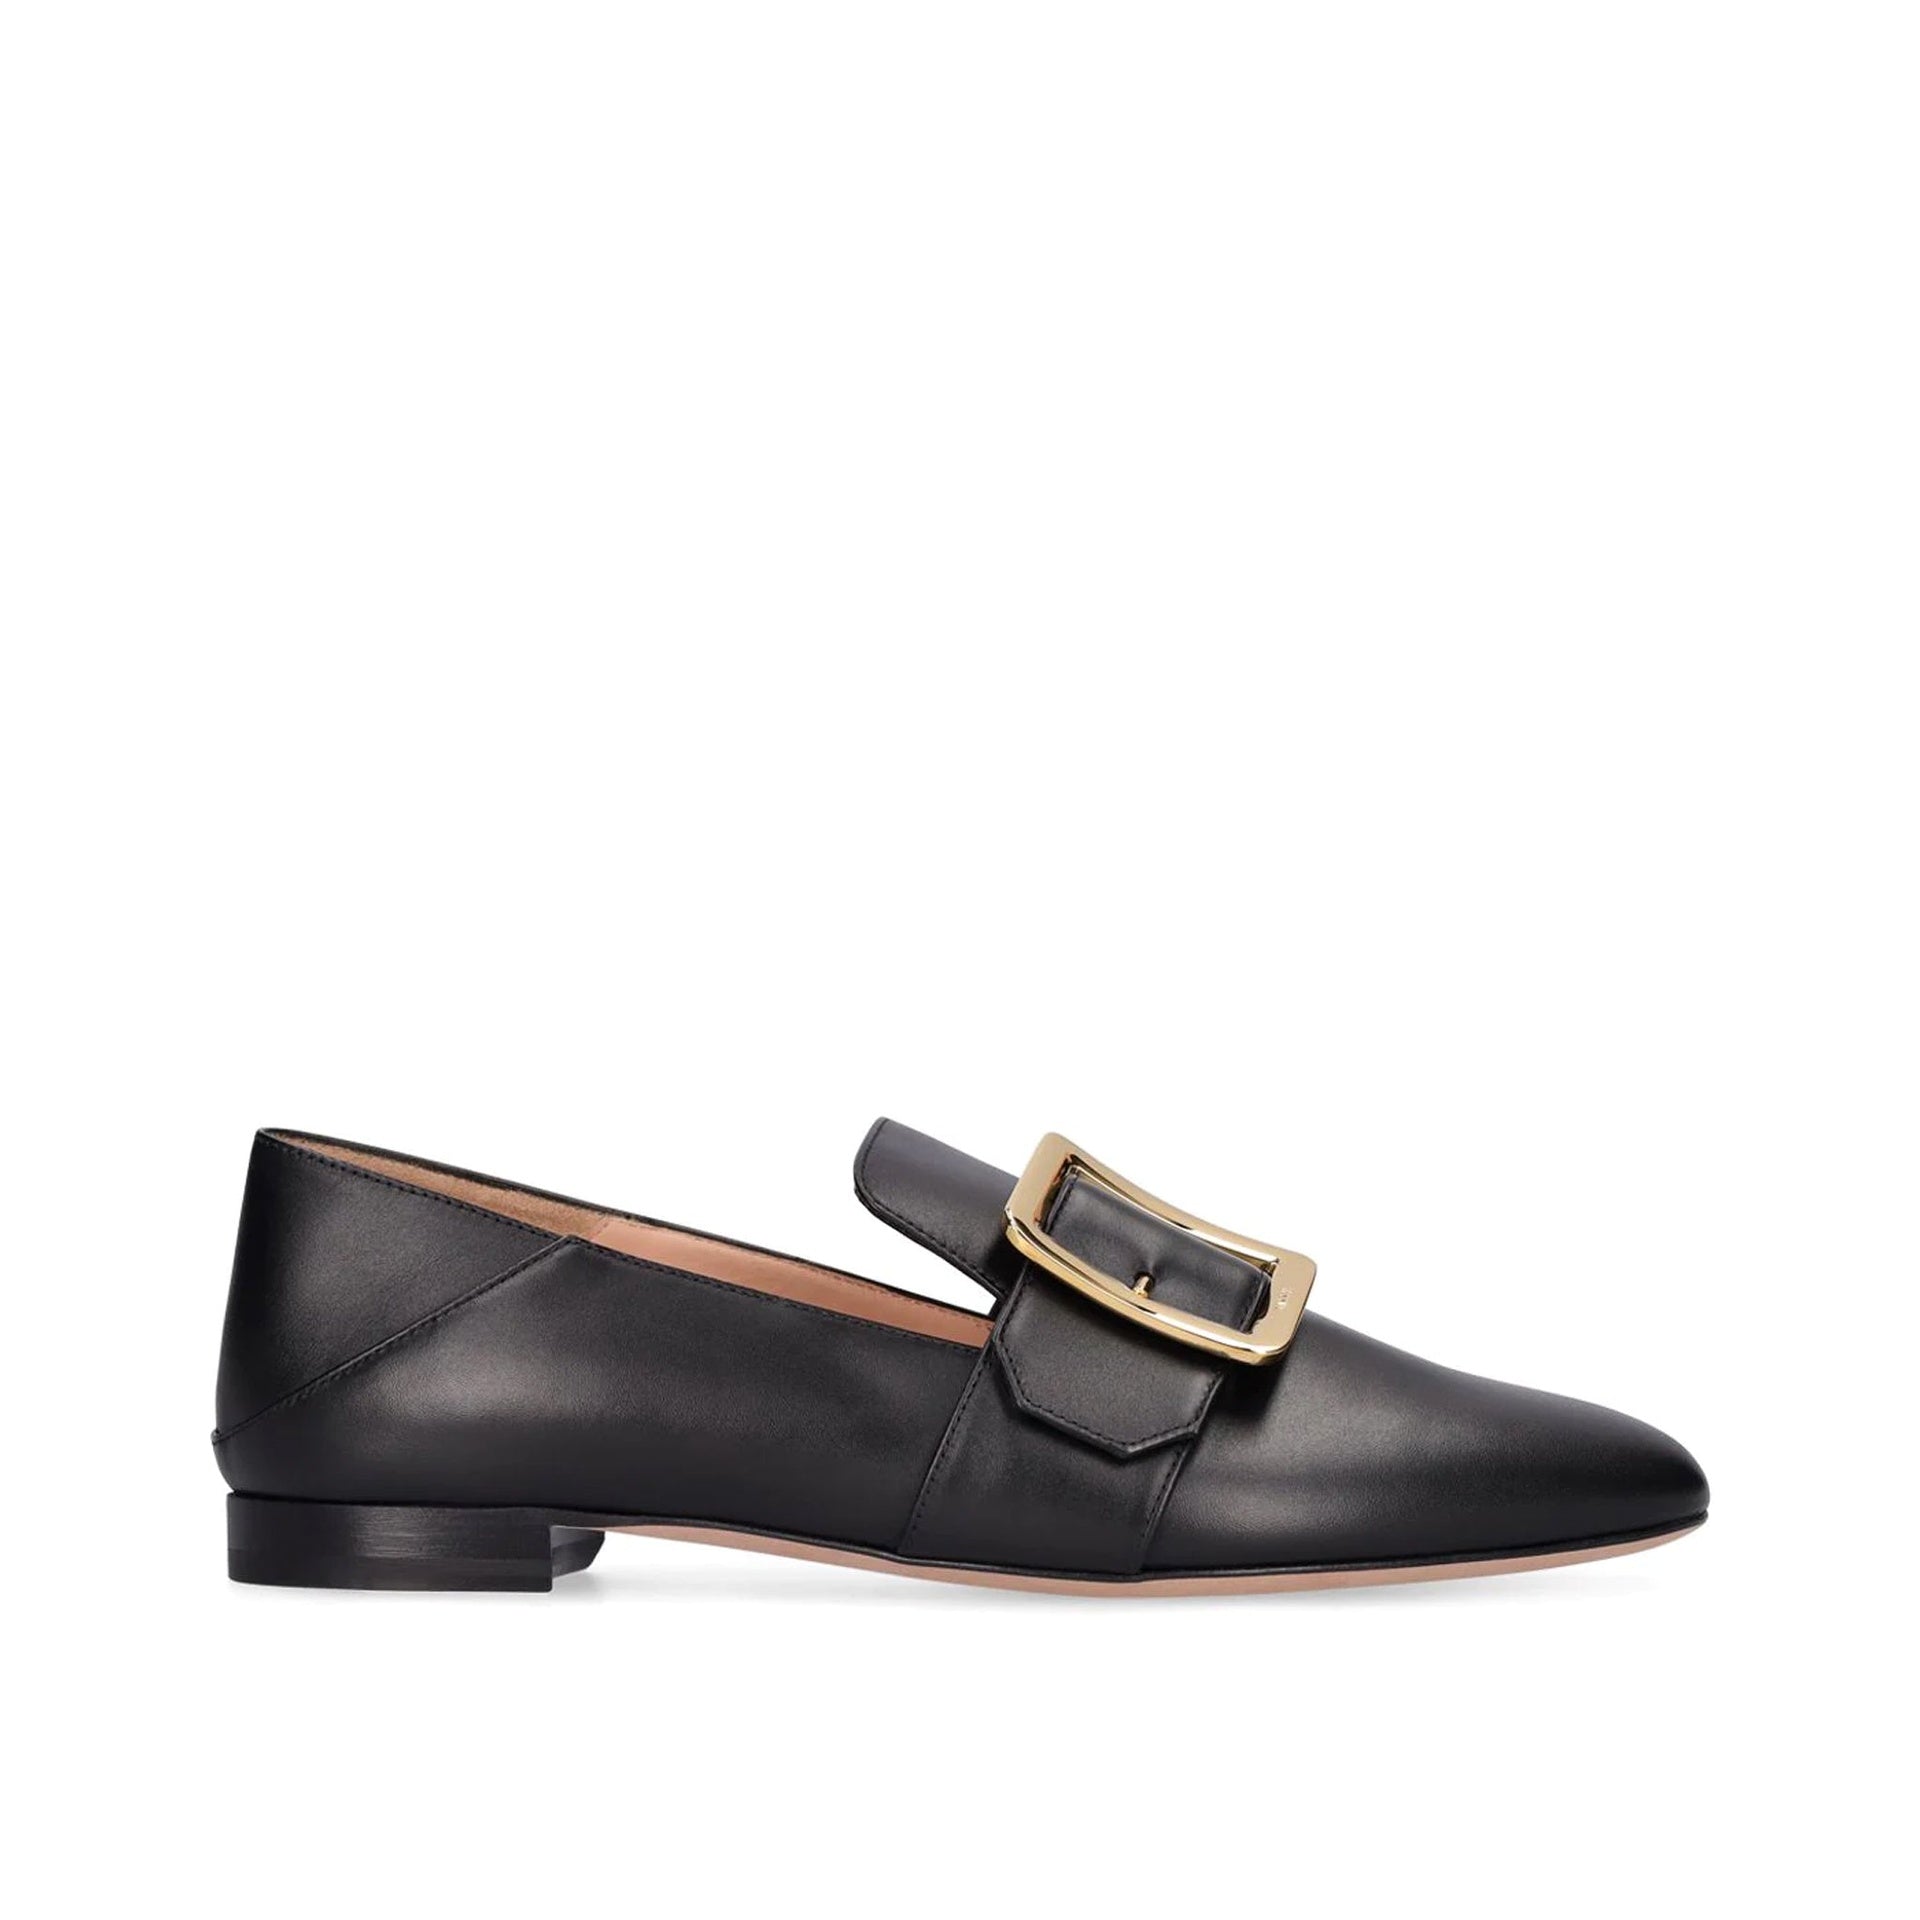 BALLY-OUTLET-SALE-Bally-Leather-Loafers-Halbschuhe-BLACK-39-ARCHIVE-COLLECTION.jpg